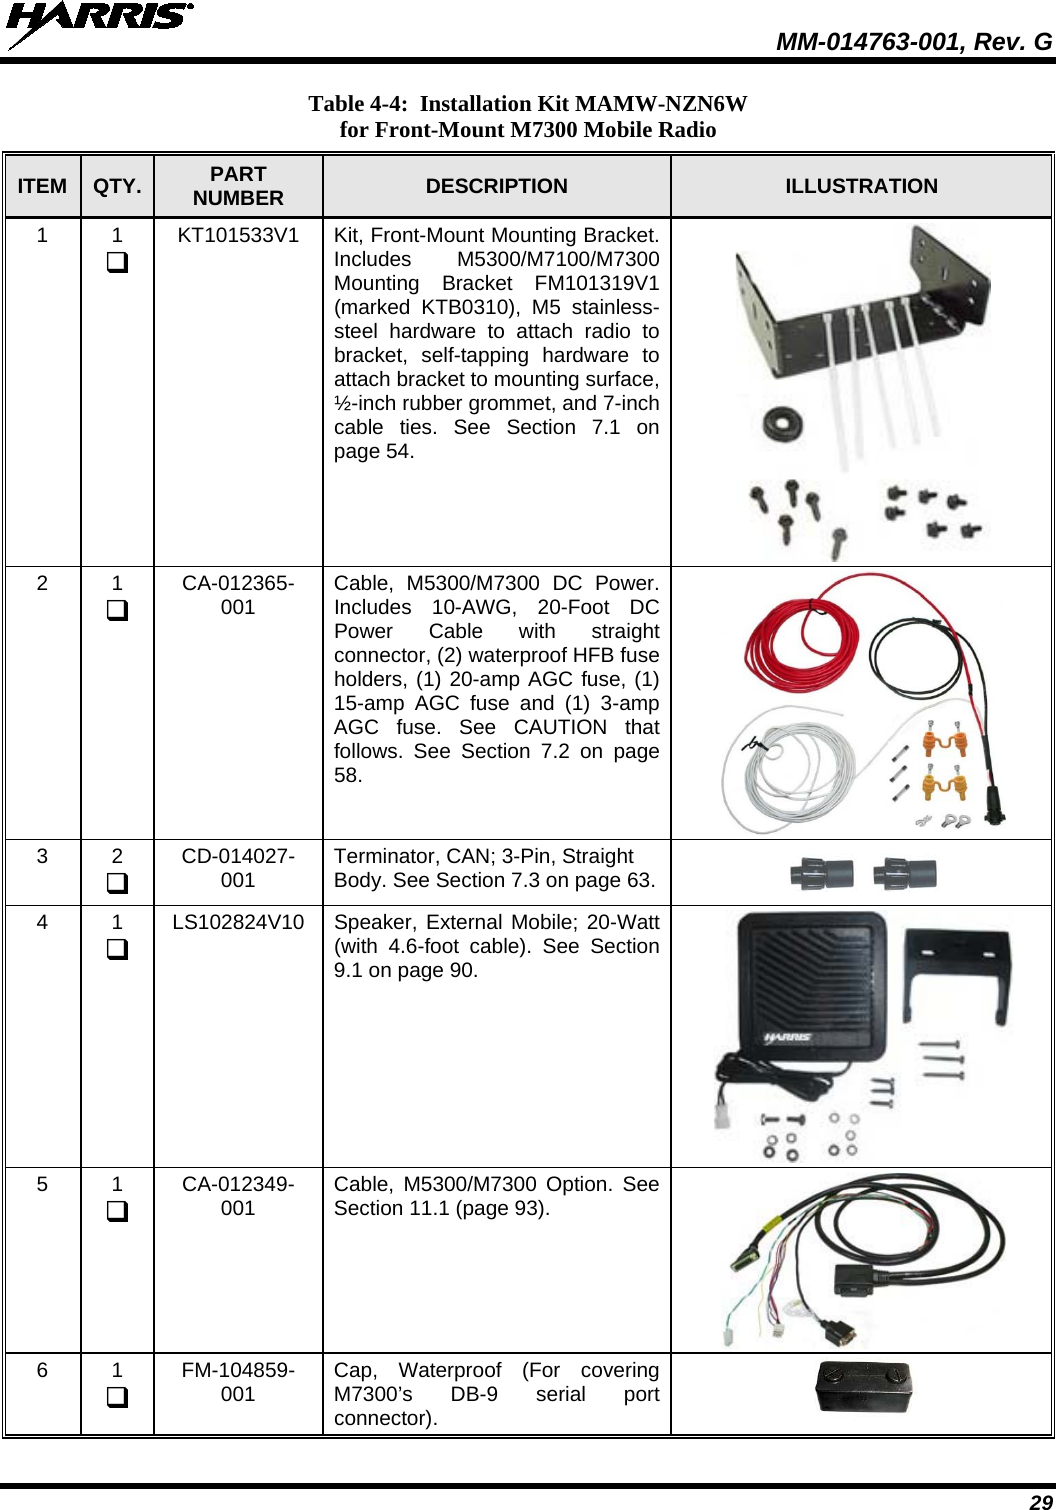  MM-014763-001, Rev. G 29 Table 4-4:  Installation Kit MAMW-NZN6W for Front-Mount M7300 Mobile Radio ITEM QTY. PART NUMBER DESCRIPTION  ILLUSTRATION 1  1  KT101533V1 Kit, Front-Mount Mounting Bracket. Includes  M5300/M7100/M7300 Mounting Bracket FM101319V1 (marked KTB0310), M5 stainless-steel hardware to attach radio to bracket, self-tapping hardware to attach bracket to mounting surface, ½-inch rubber grommet, and 7-inch cable  ties. See Section 7.1 on page 54.  2  1  CA-012365-001 Cable,  M5300/M7300 DC Power. Includes 10-AWG, 20-Foot DC Power Cable with straight connector, (2) waterproof HFB fuse holders, (1) 20-amp AGC fuse, (1) 15-amp AGC fuse and (1) 3-amp AGC fuse. See CAUTION that follows. See Section 7.2 on page 58.  3  2  CD-014027-001 Terminator, CAN; 3-Pin, Straight Body. See Section 7.3 on page 63.       4  1  LS102824V10 Speaker, External Mobile; 20-Watt (with 4.6-foot cable).  See Section 9.1 on page 90.  5  1  CA-012349-001 Cable, M5300/M7300 Option. See Section 11.1 (page 93).  6  1  FM-104859-001 Cap, Waterproof (For covering M7300’s DB-9 serial port connector).    